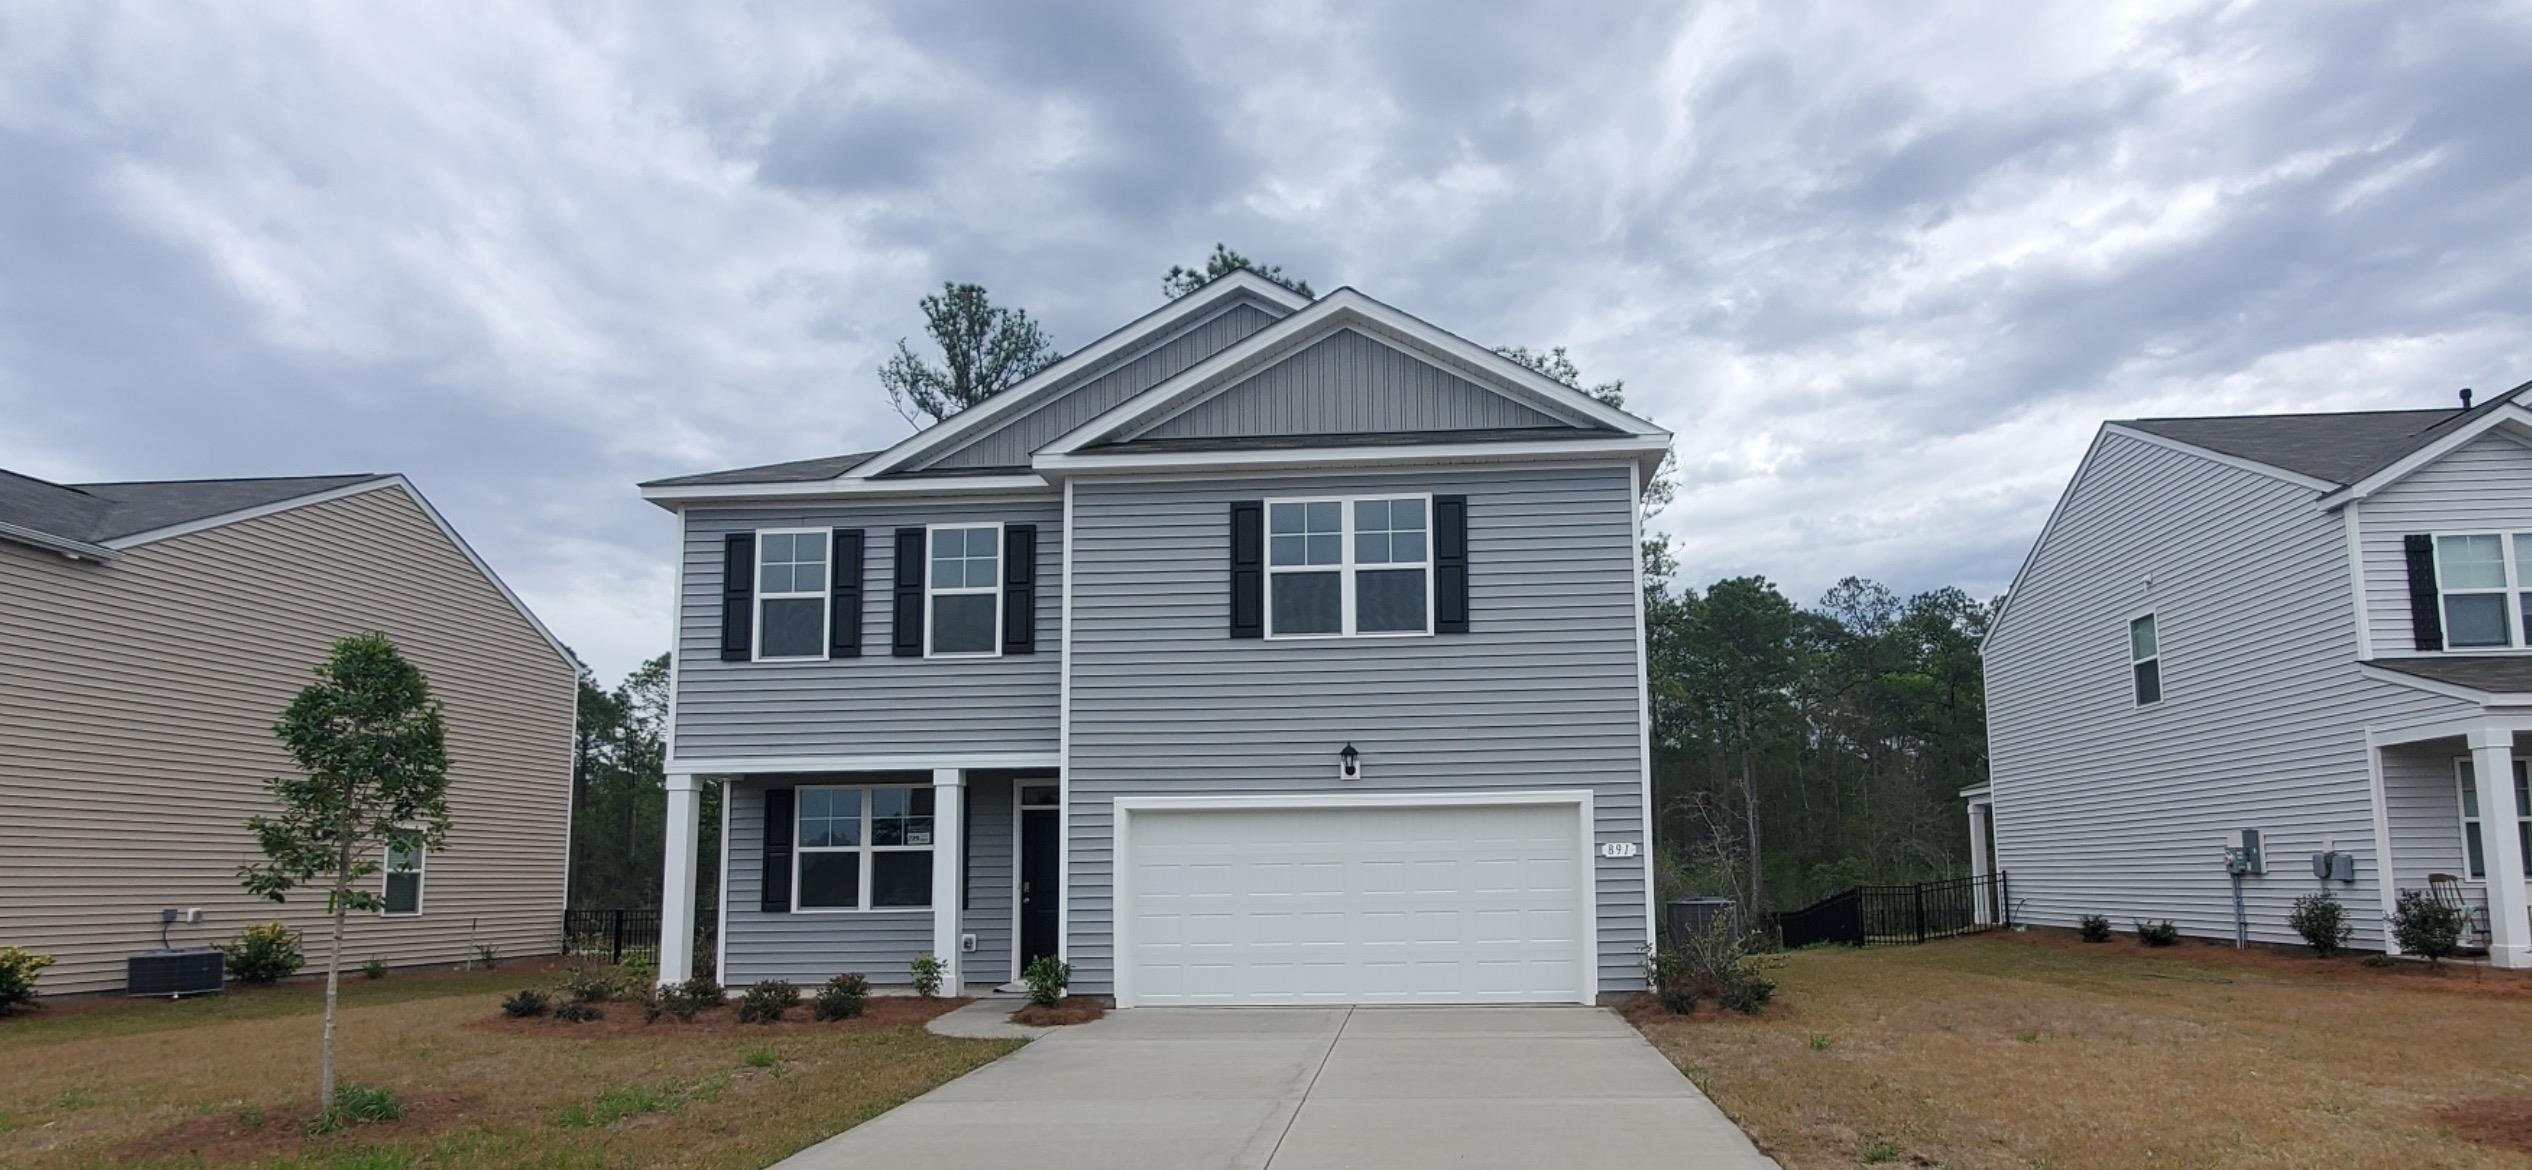 891 Heritage Downs Dr. Conway, SC 29526